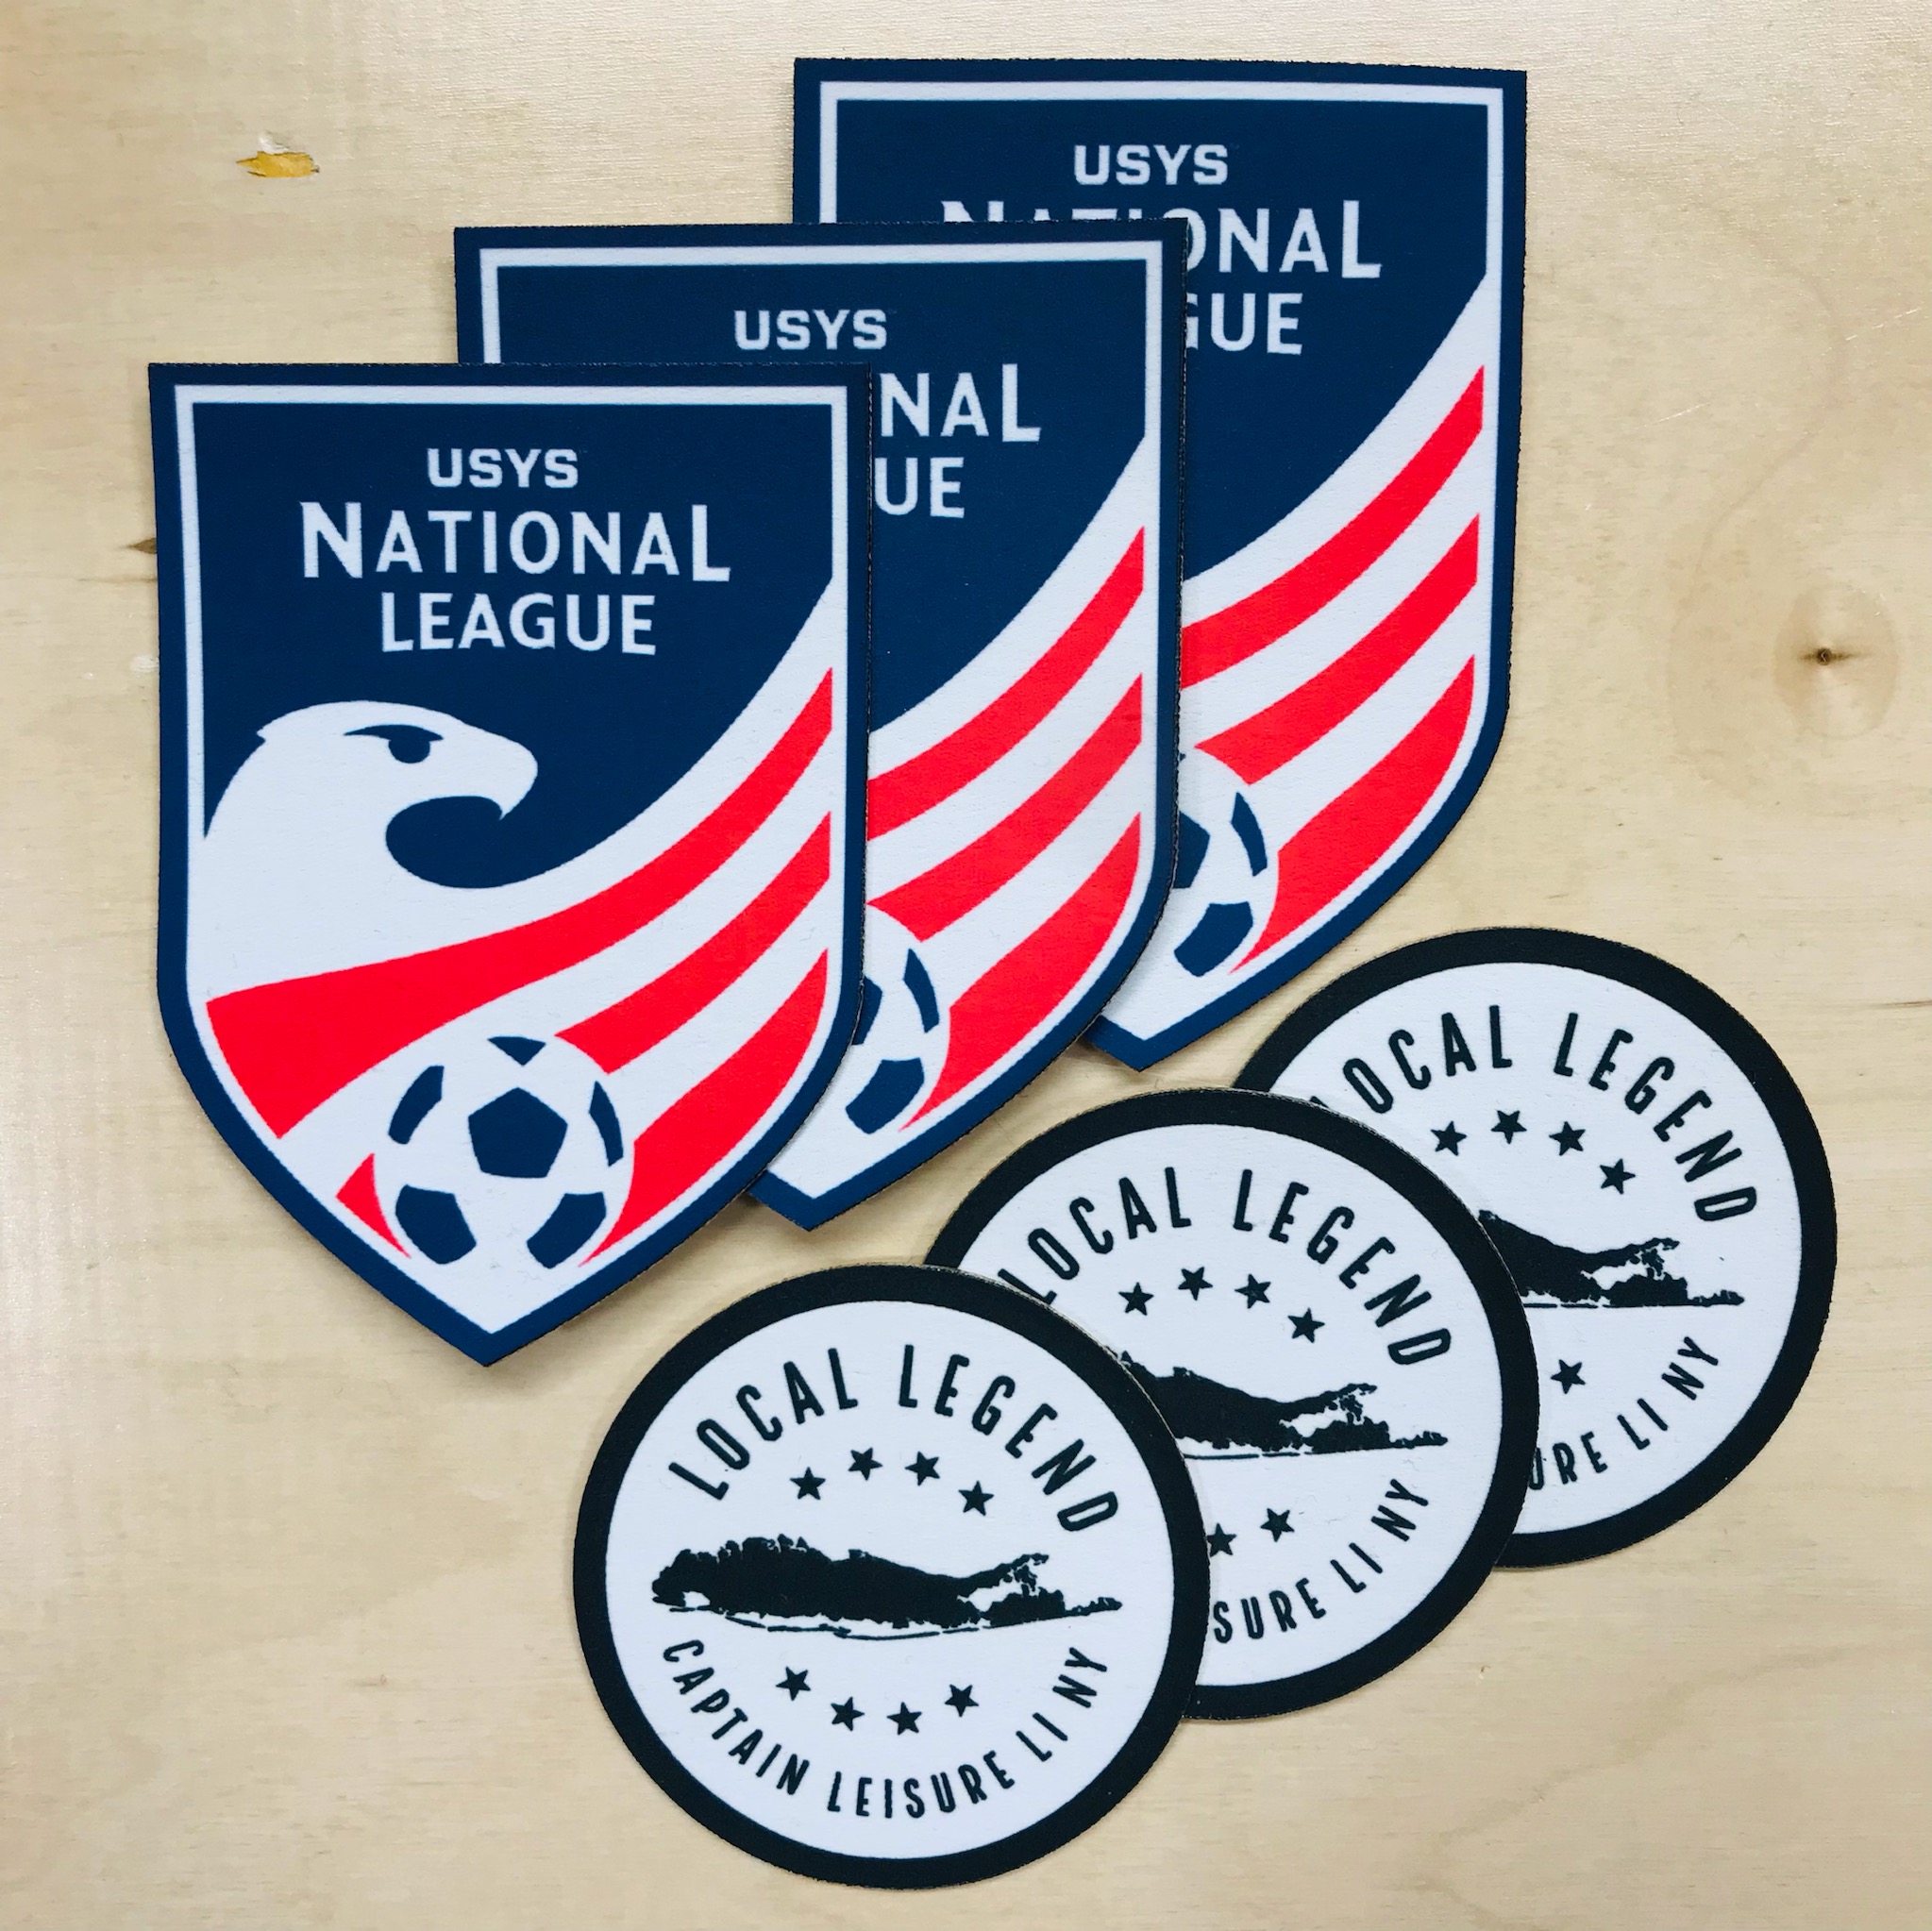 Custom Patches - Create Custom Patches today! – STR8 SPORTS, Inc.